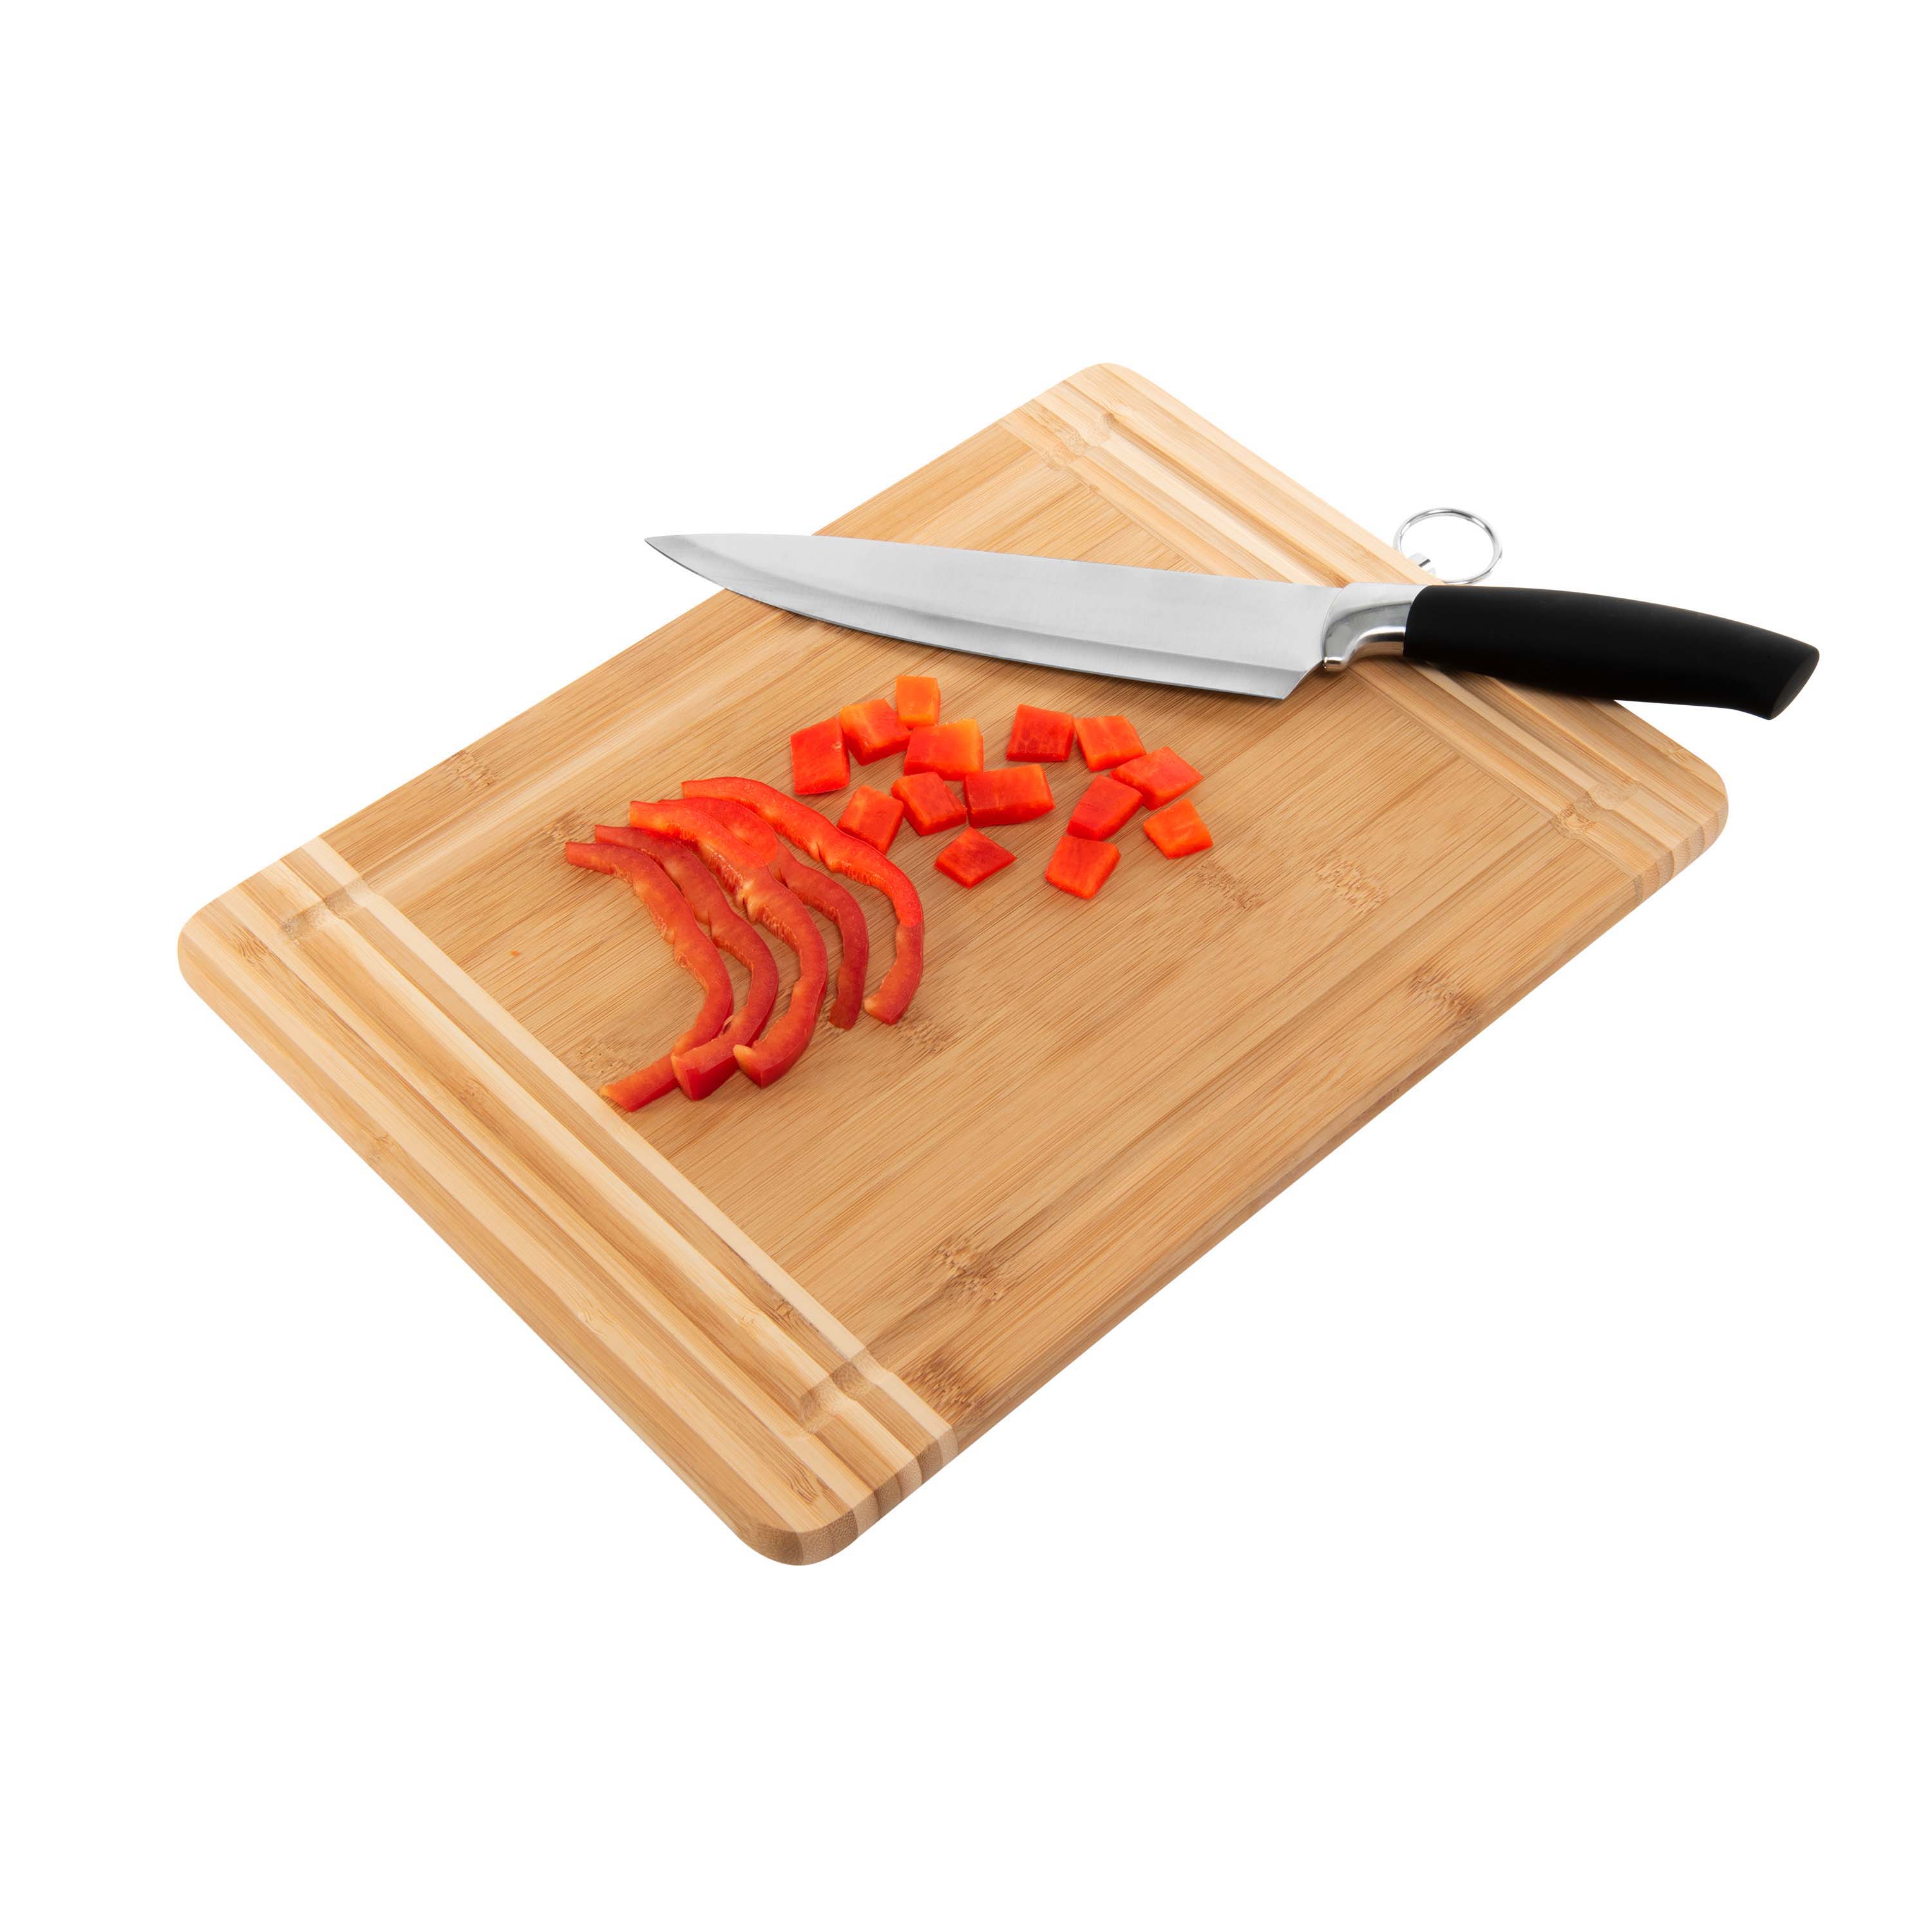 Bamboo Cutting Boards for Kitchen ✓ Get it Online today!